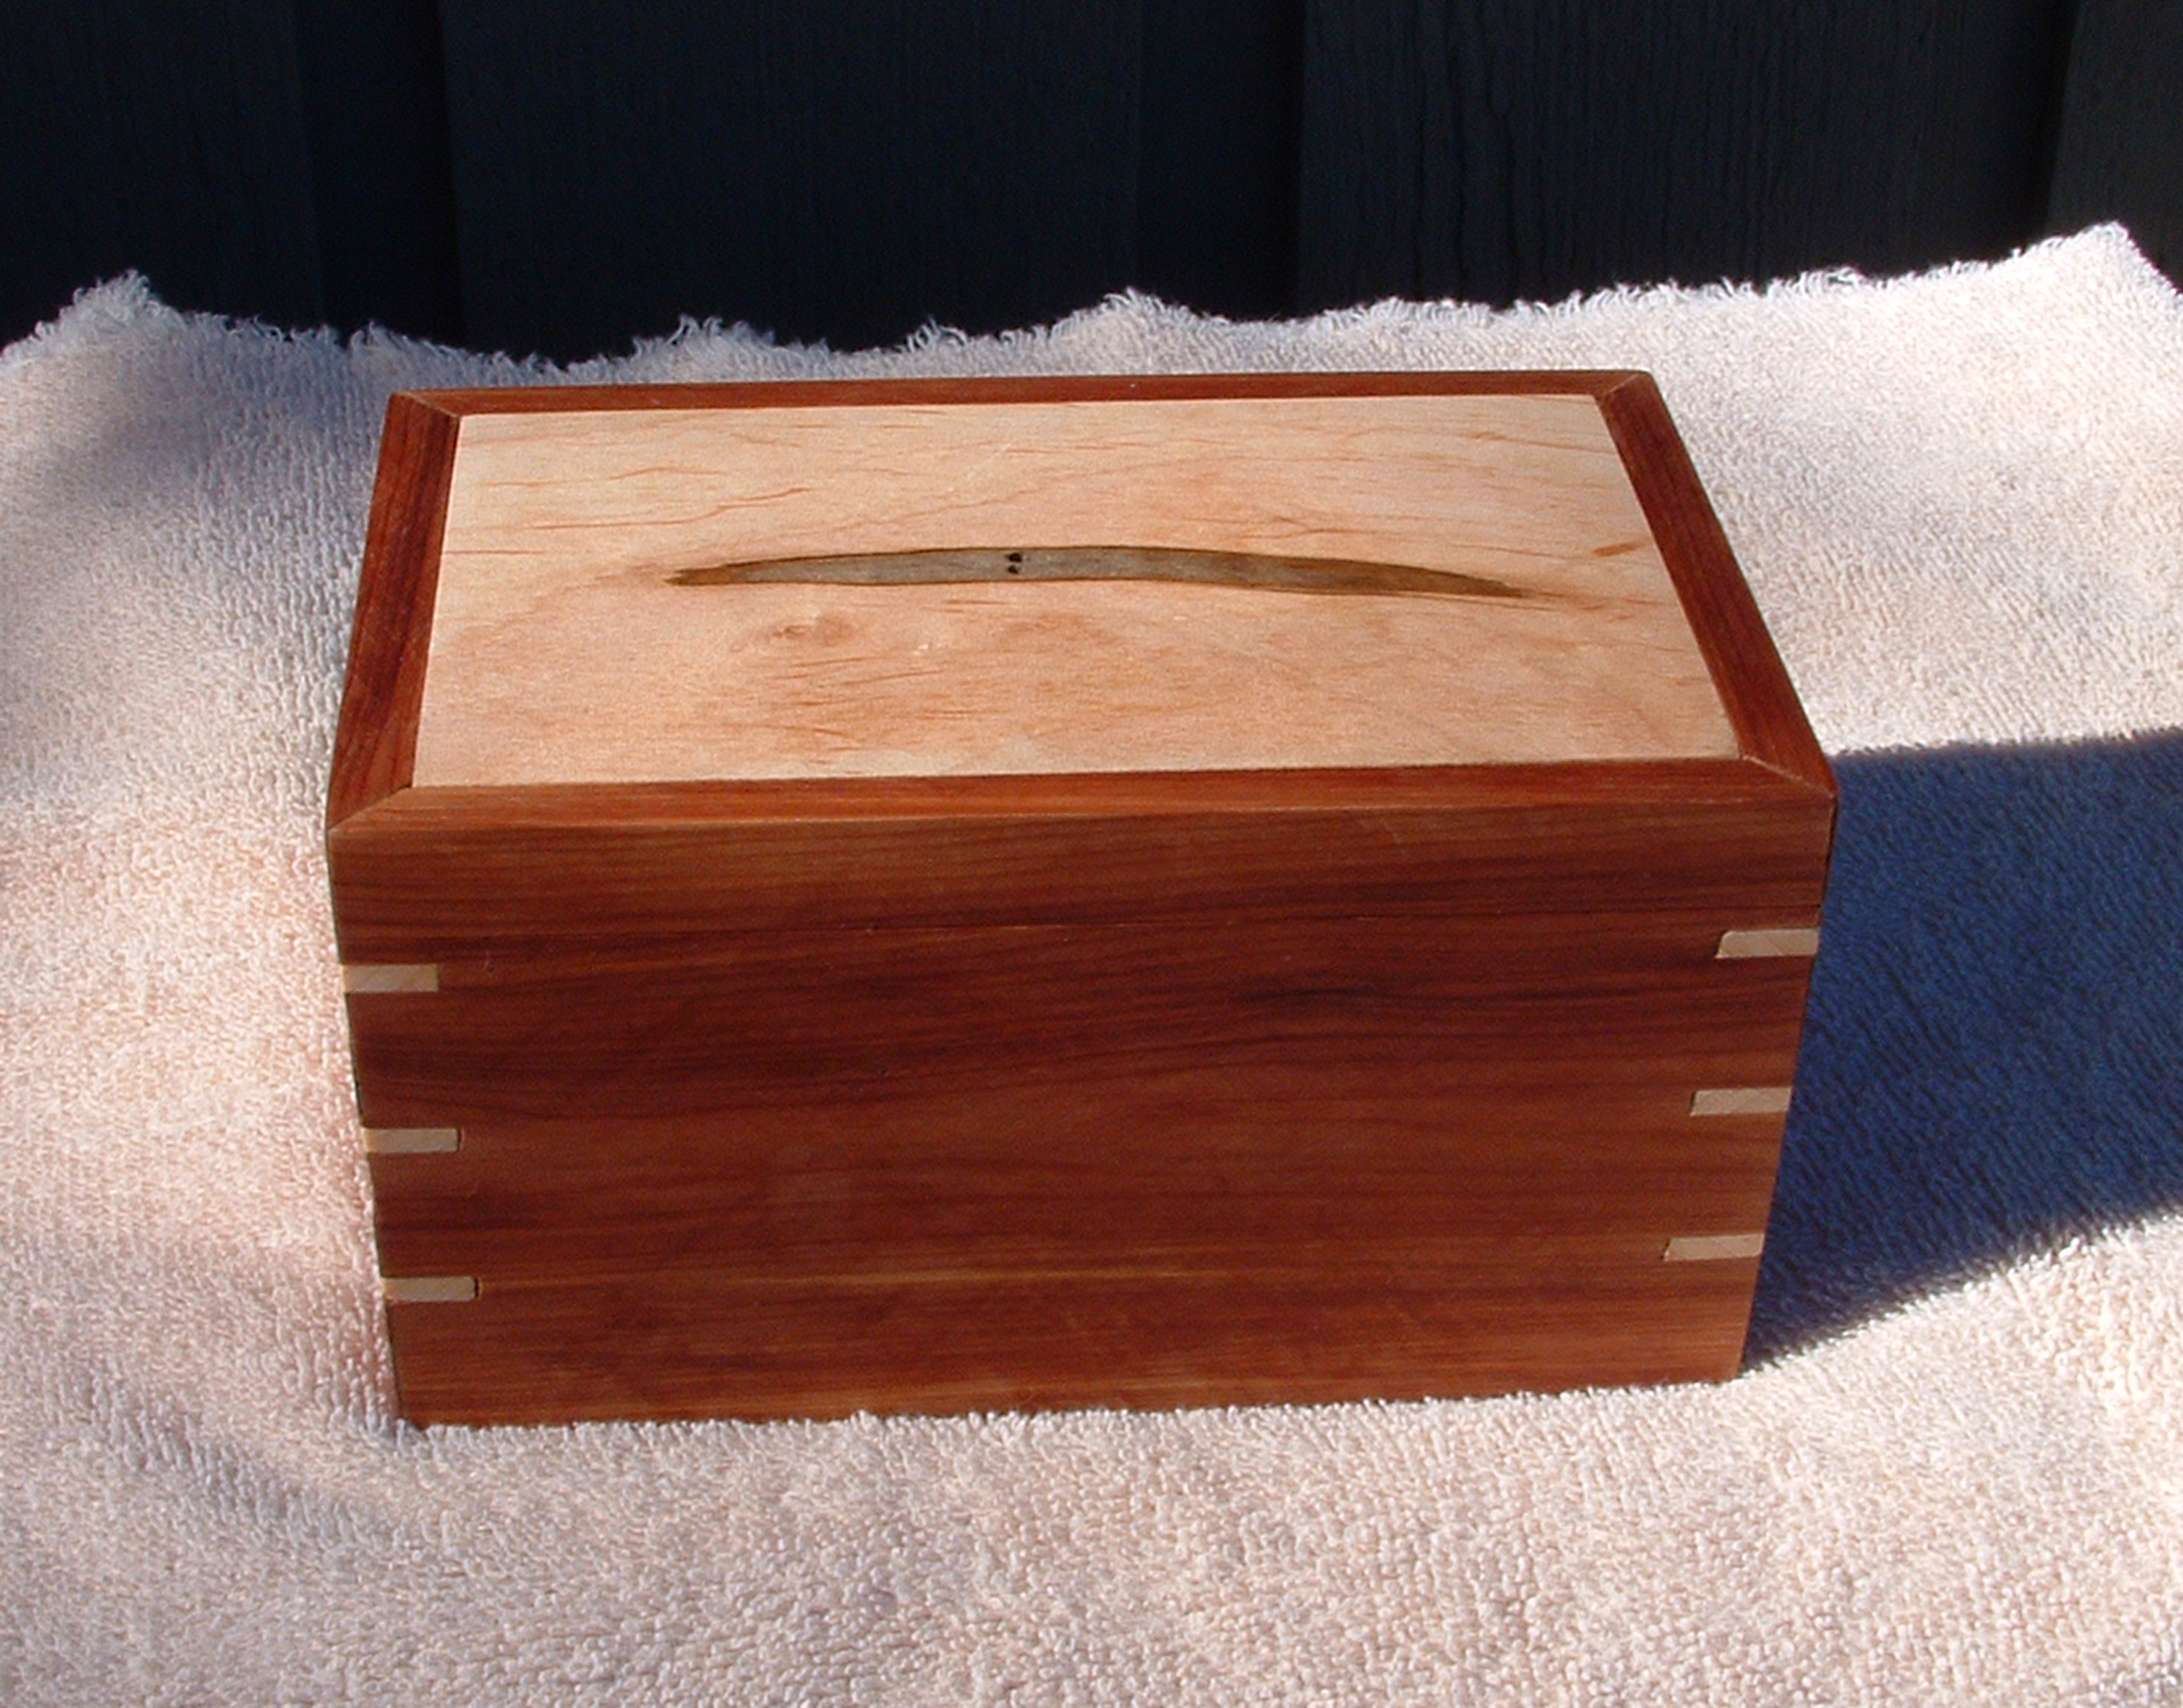 Cedar and Spalted Maple Box